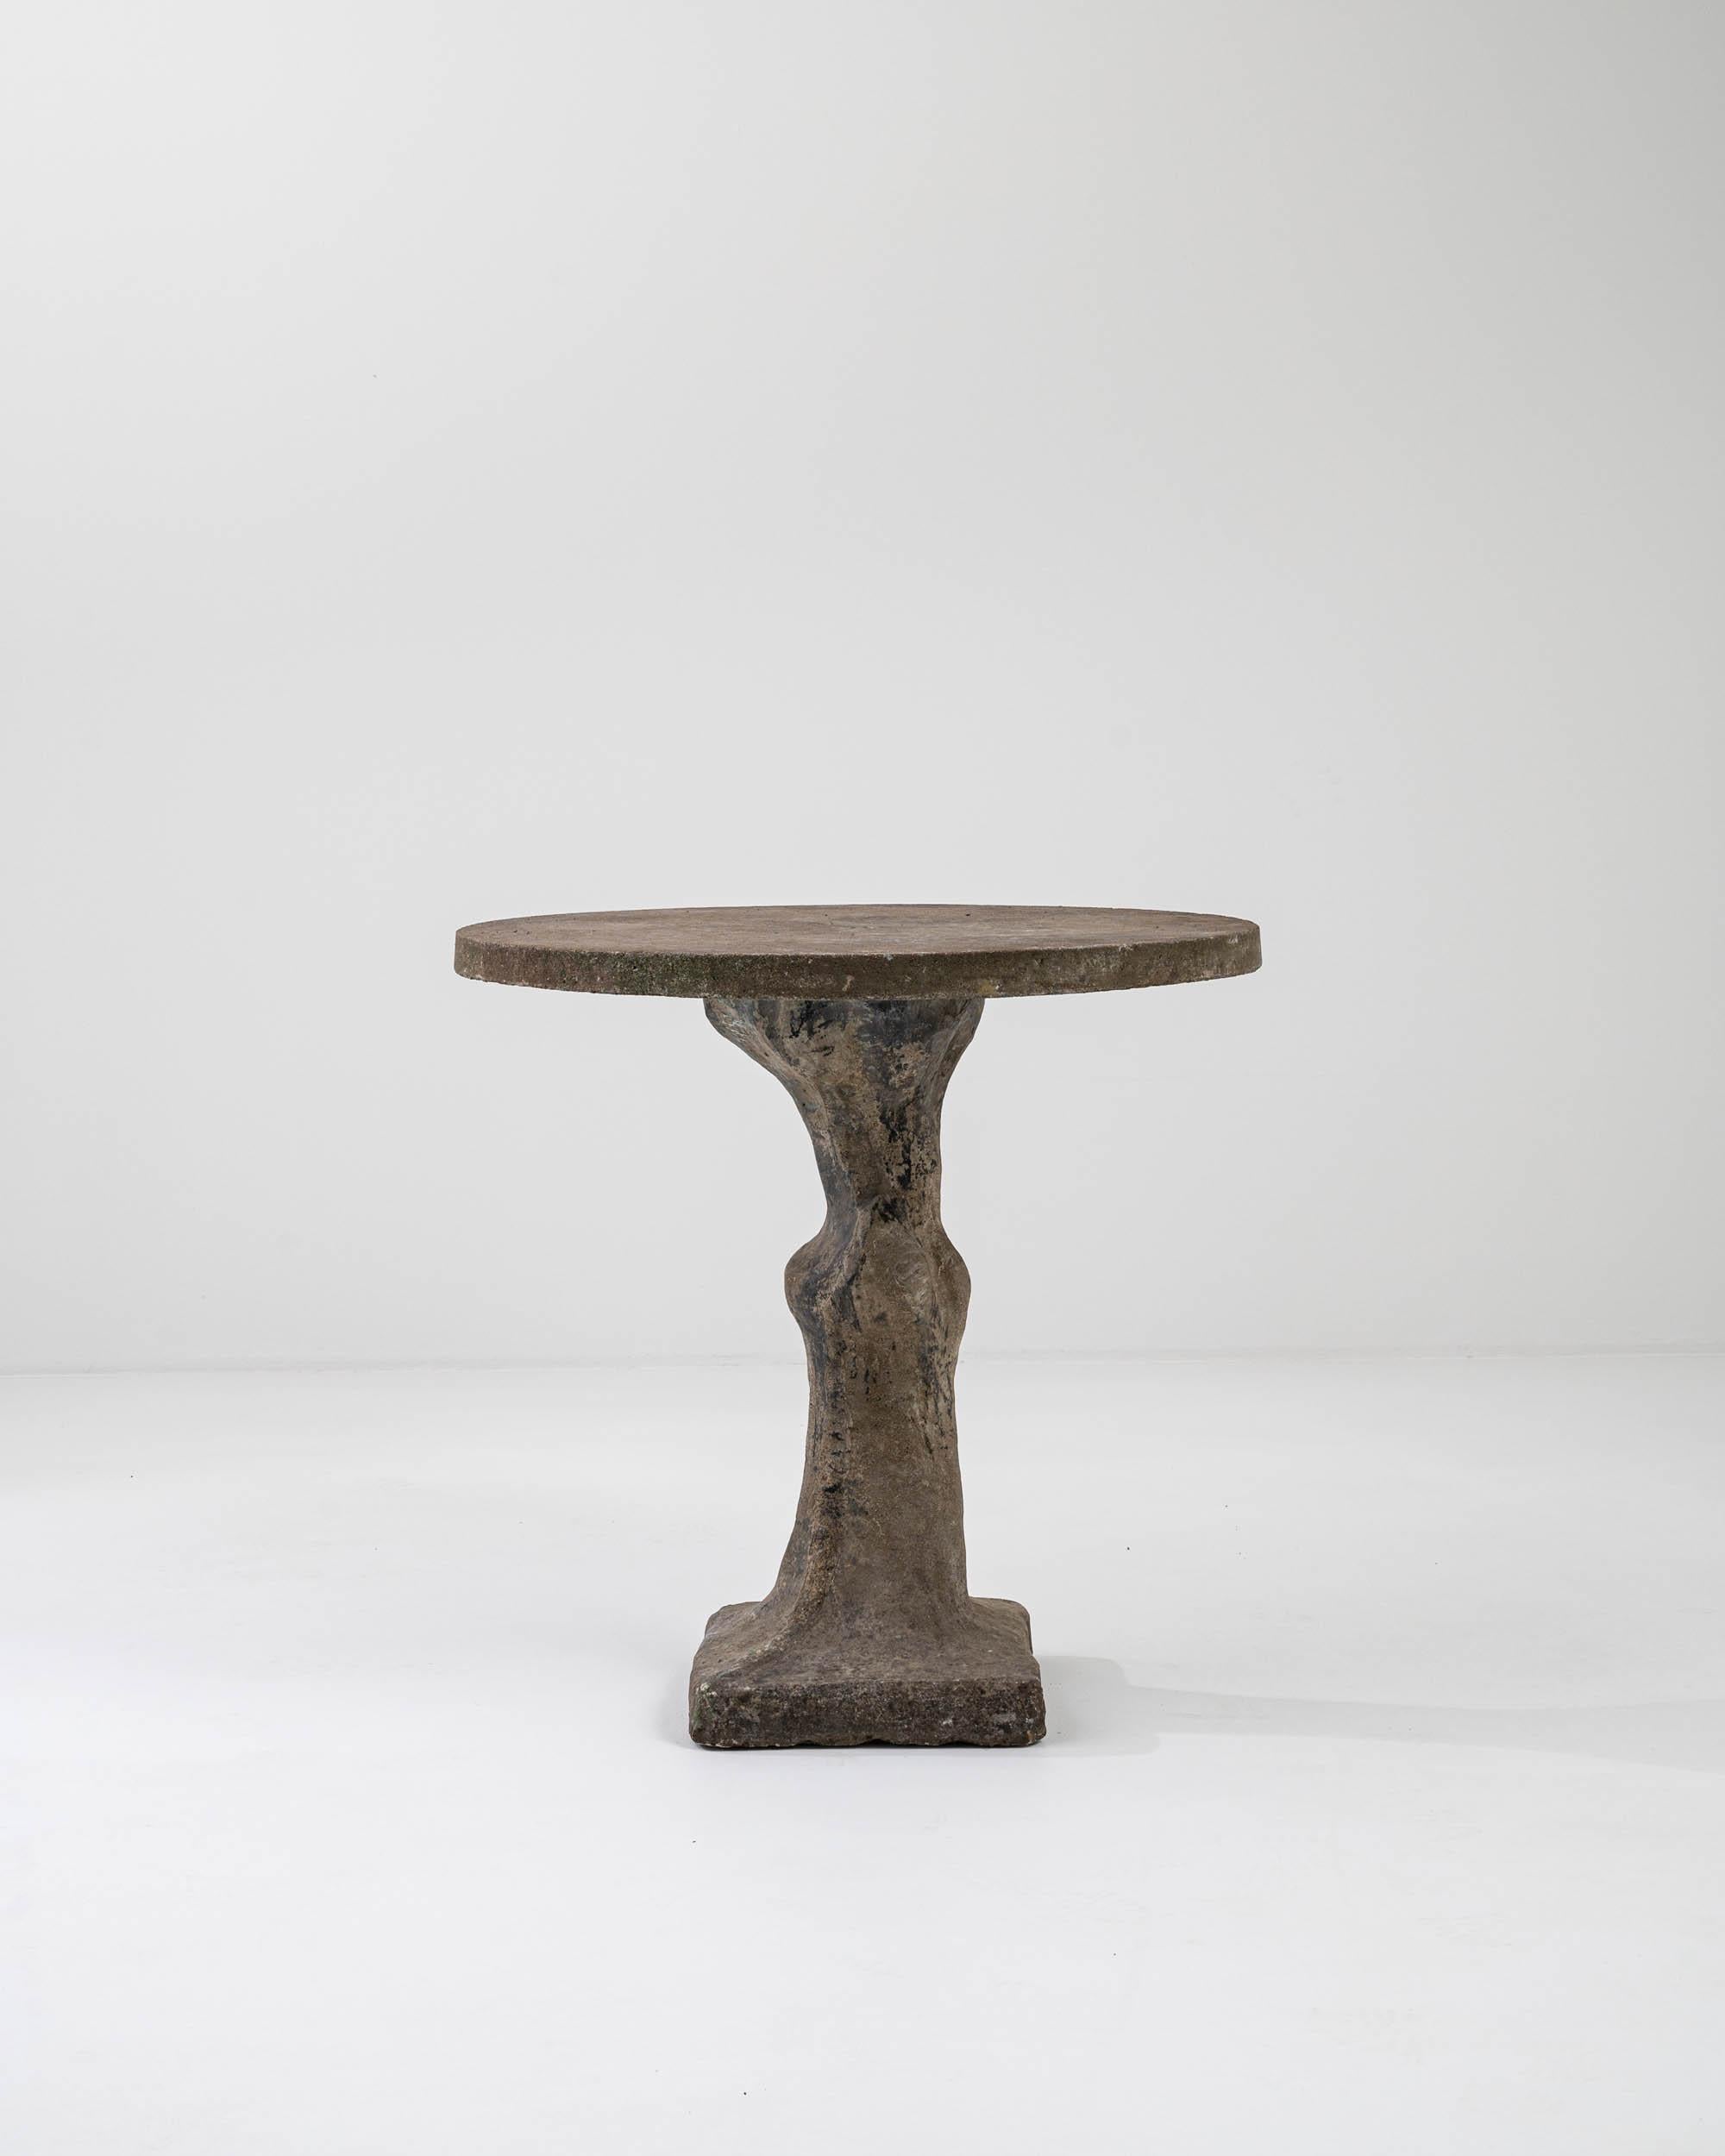 The compelling form of this vintage table — at once abstract and organic — gives it a unique, sculptural appeal. Made in Belgium in the 1960s, a circular tabletop rests atop an asymmetric base. The knotty yet elegant form of the central pedestal is